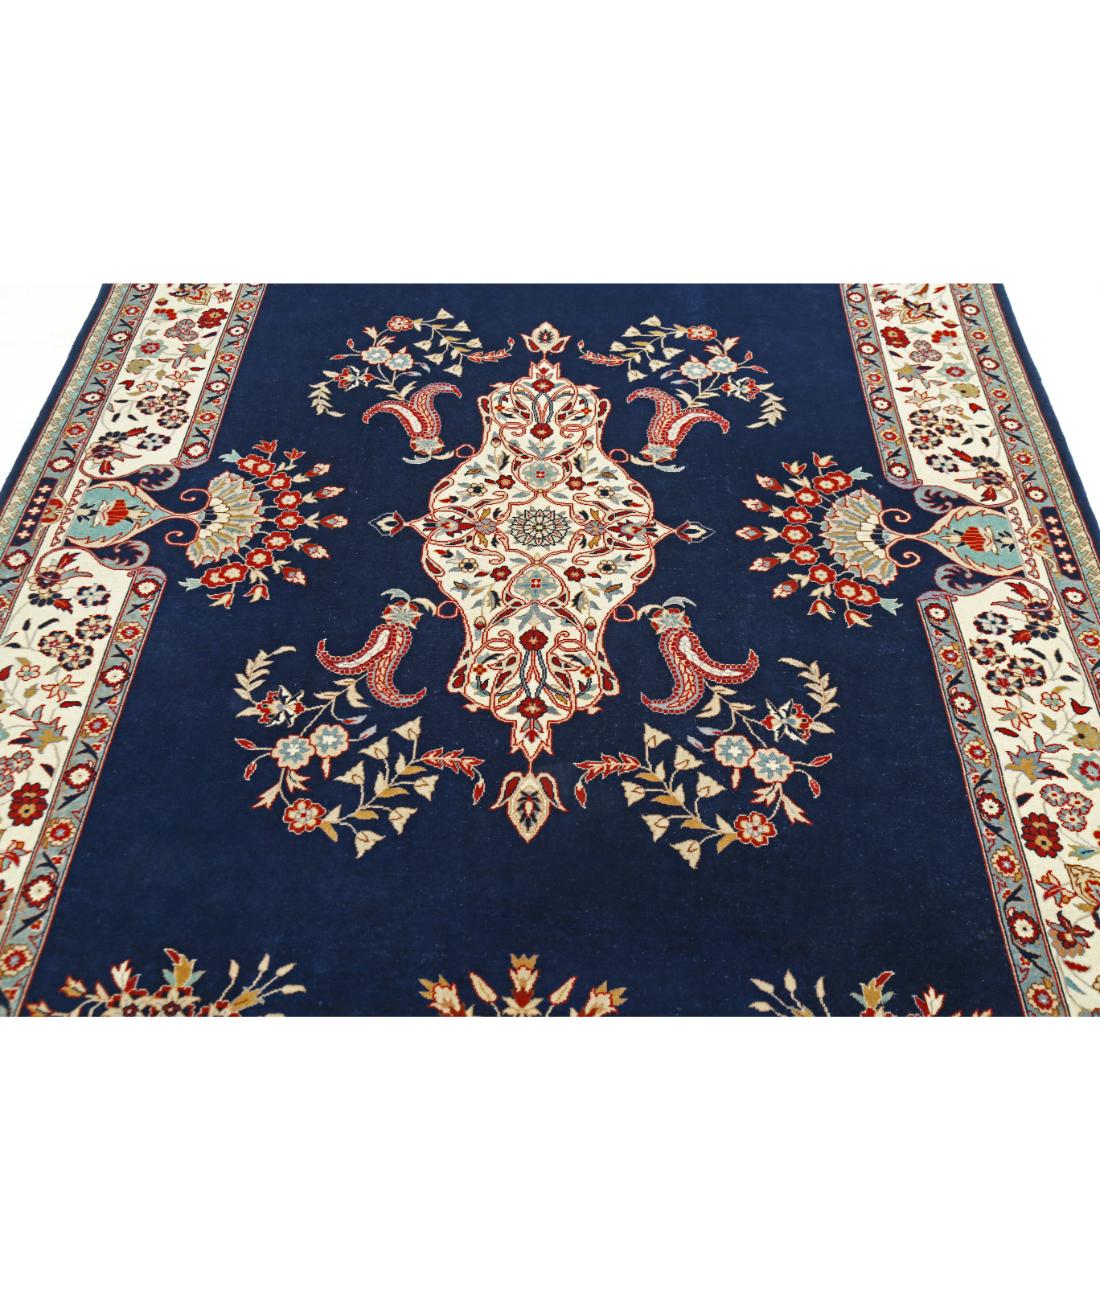 Heritage 5' 11" X 8' 11" Hand-Knotted Wool Rug 5' 11" X 8' 11" (180 X 272) / Blue / Ivory